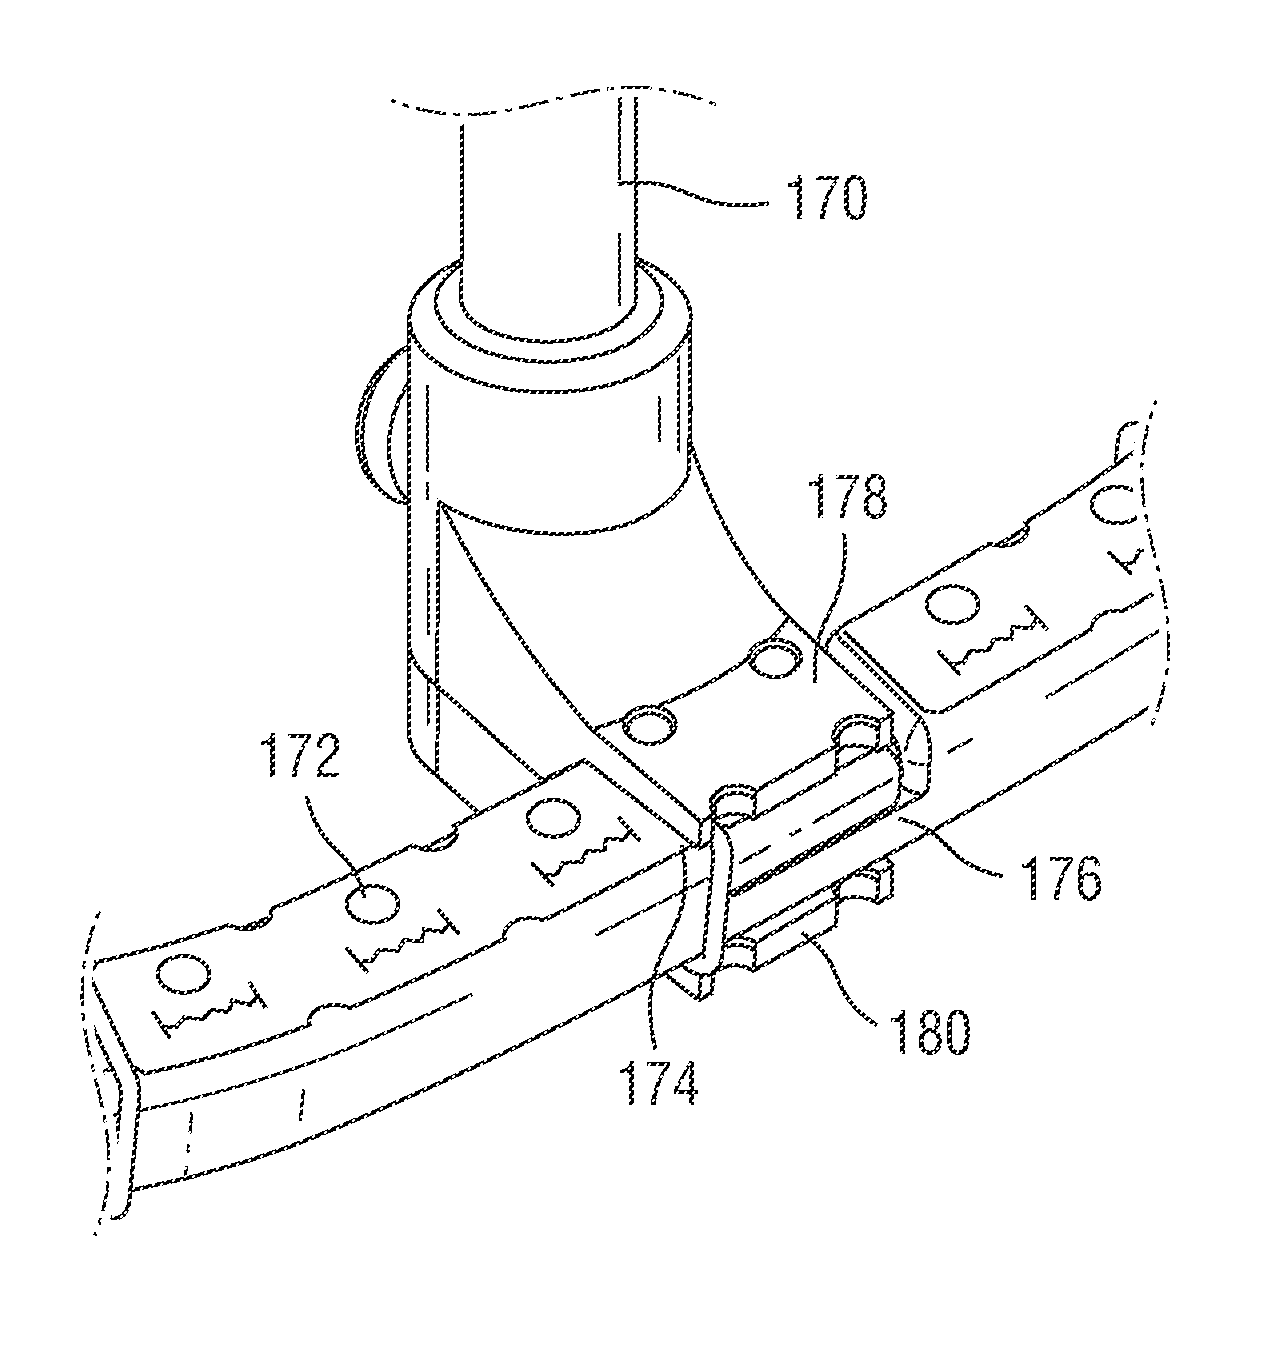 Collapsible cardiac implant and deployment system and methods